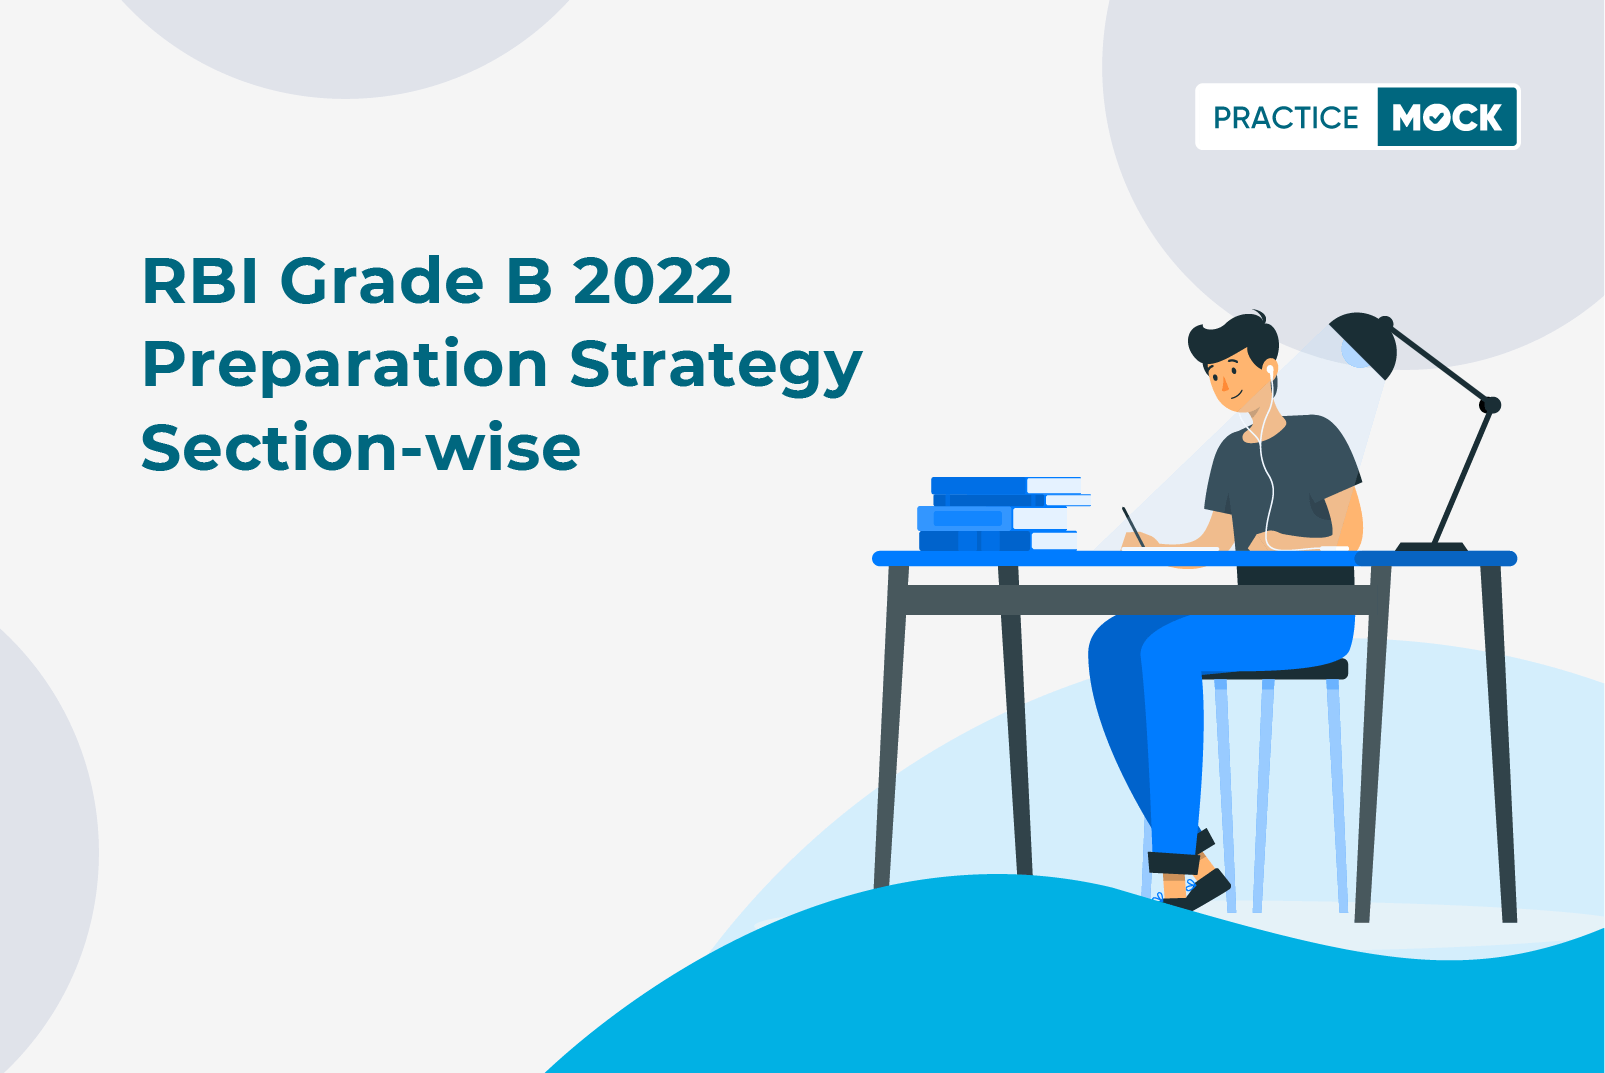 RBI Grade B 2022 Preparation Strategy Section-wise